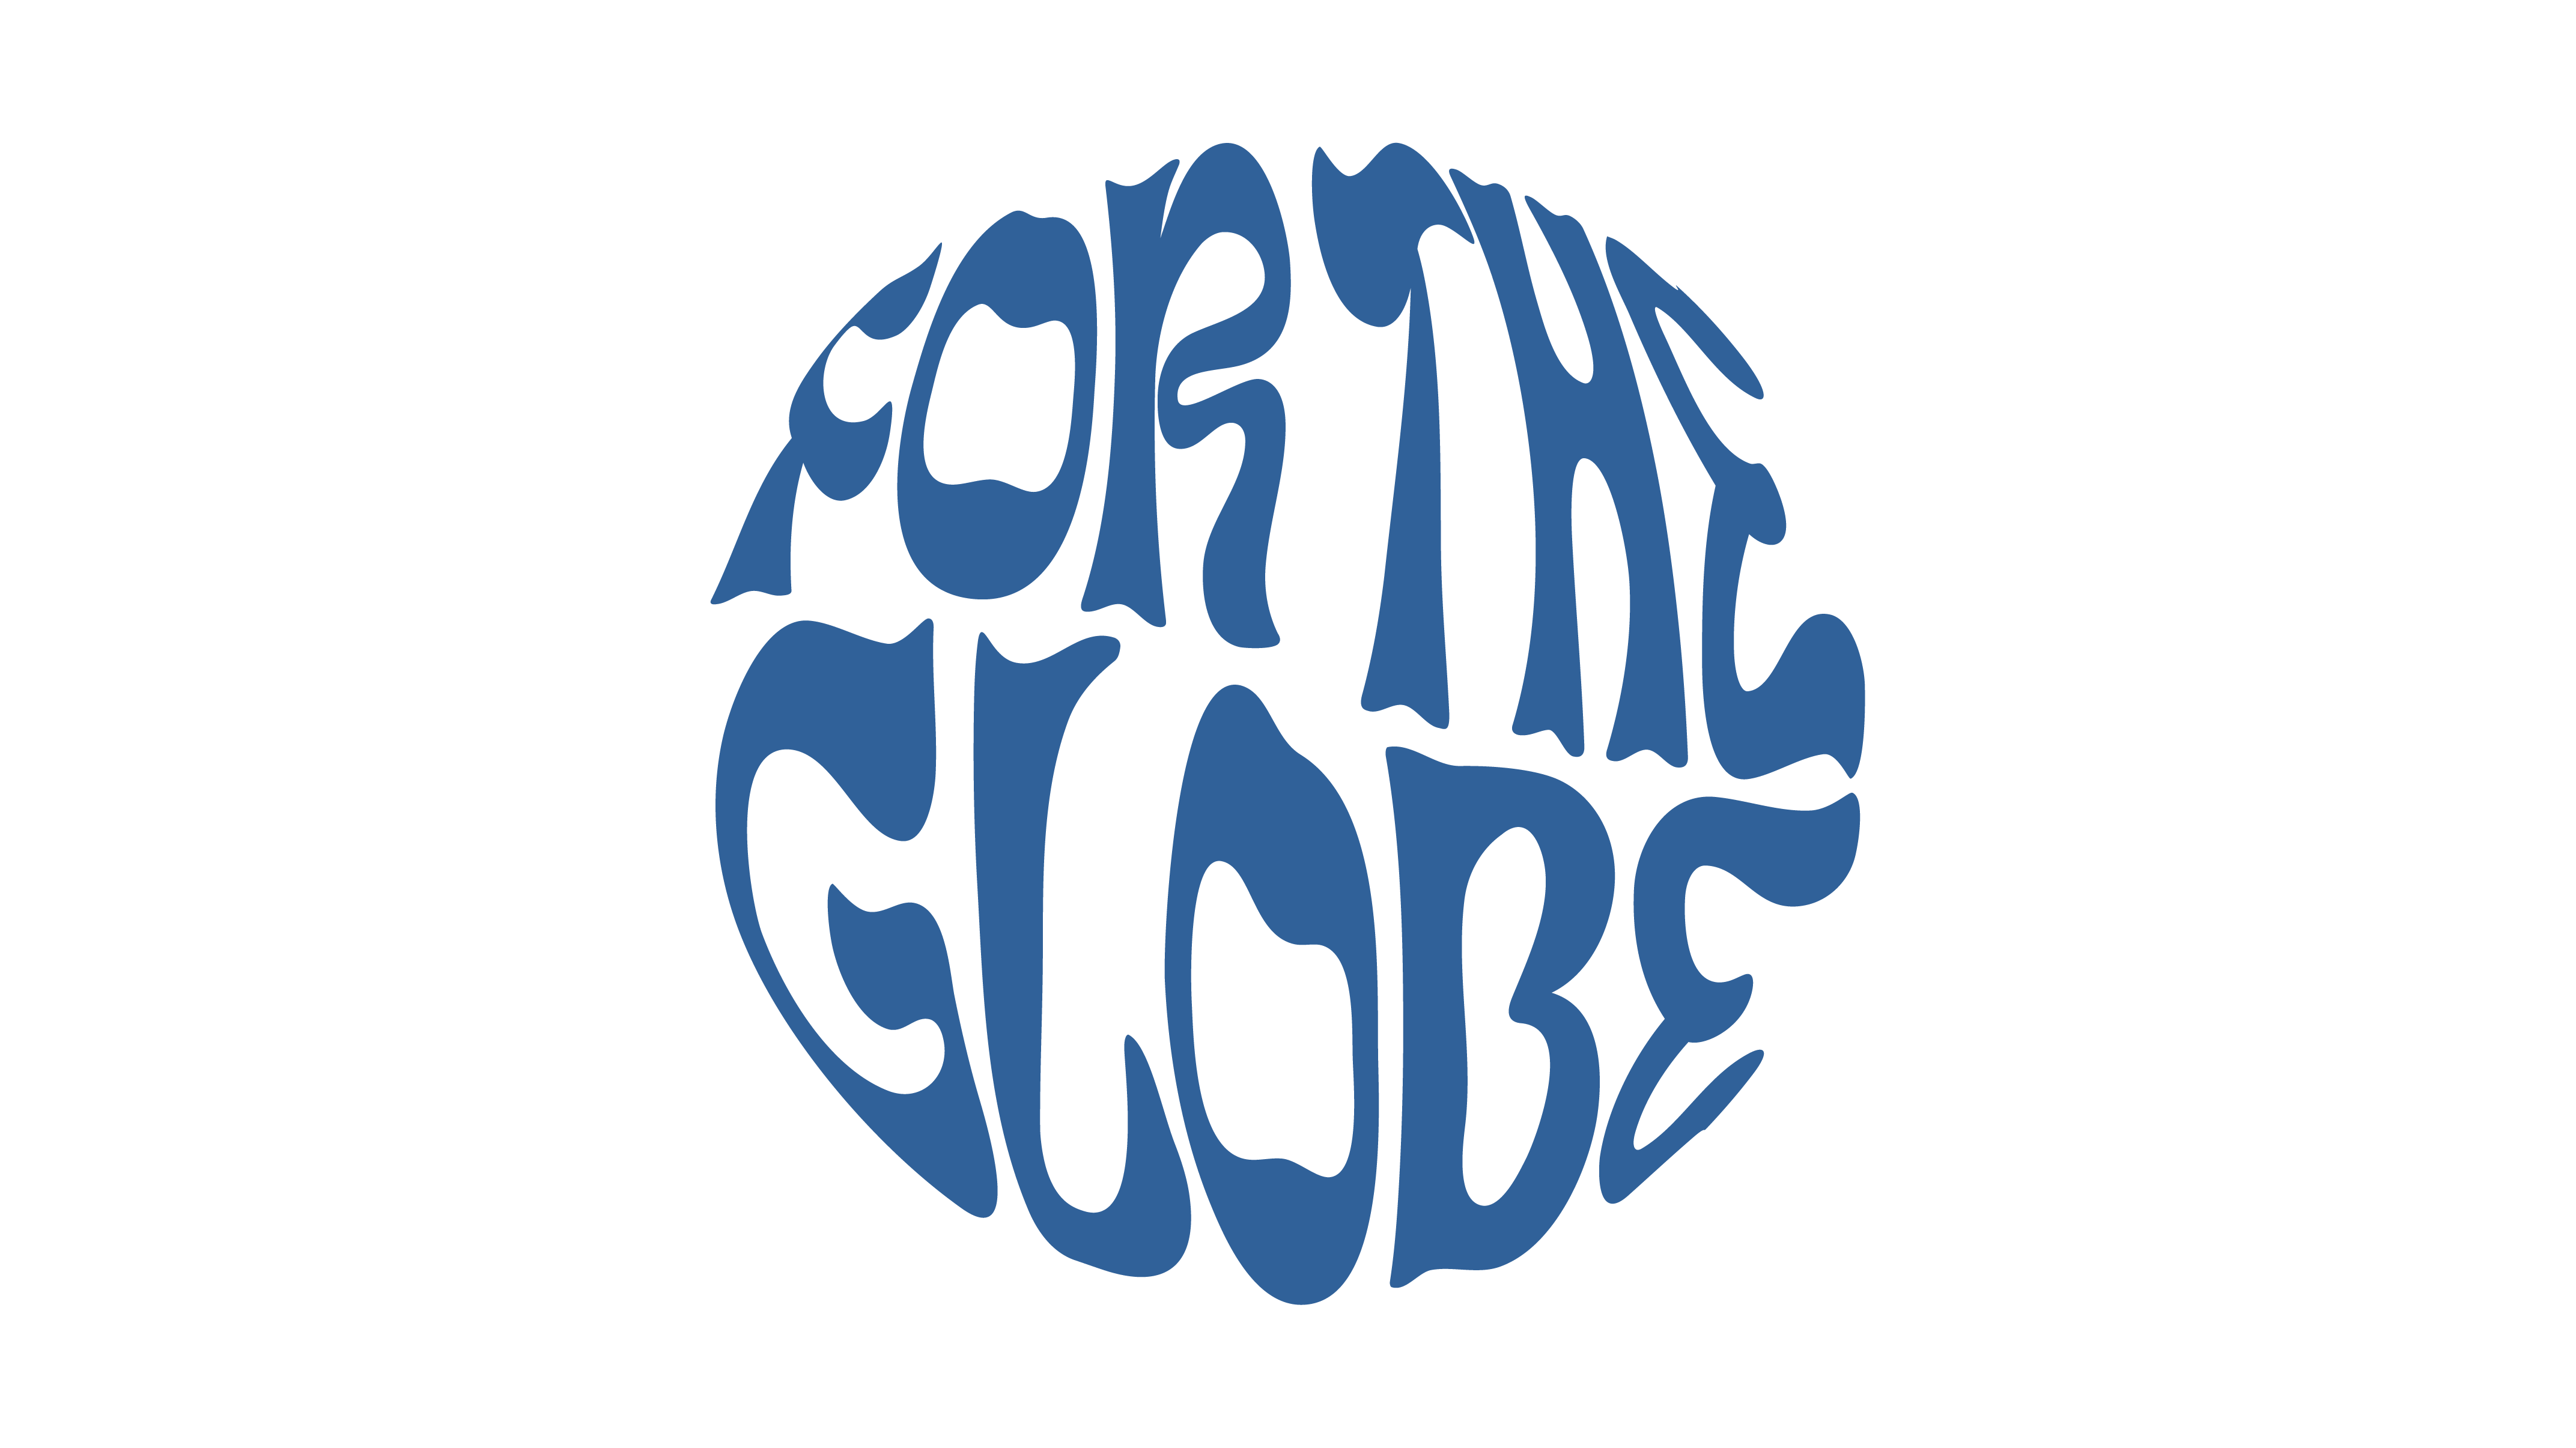 For the Globe